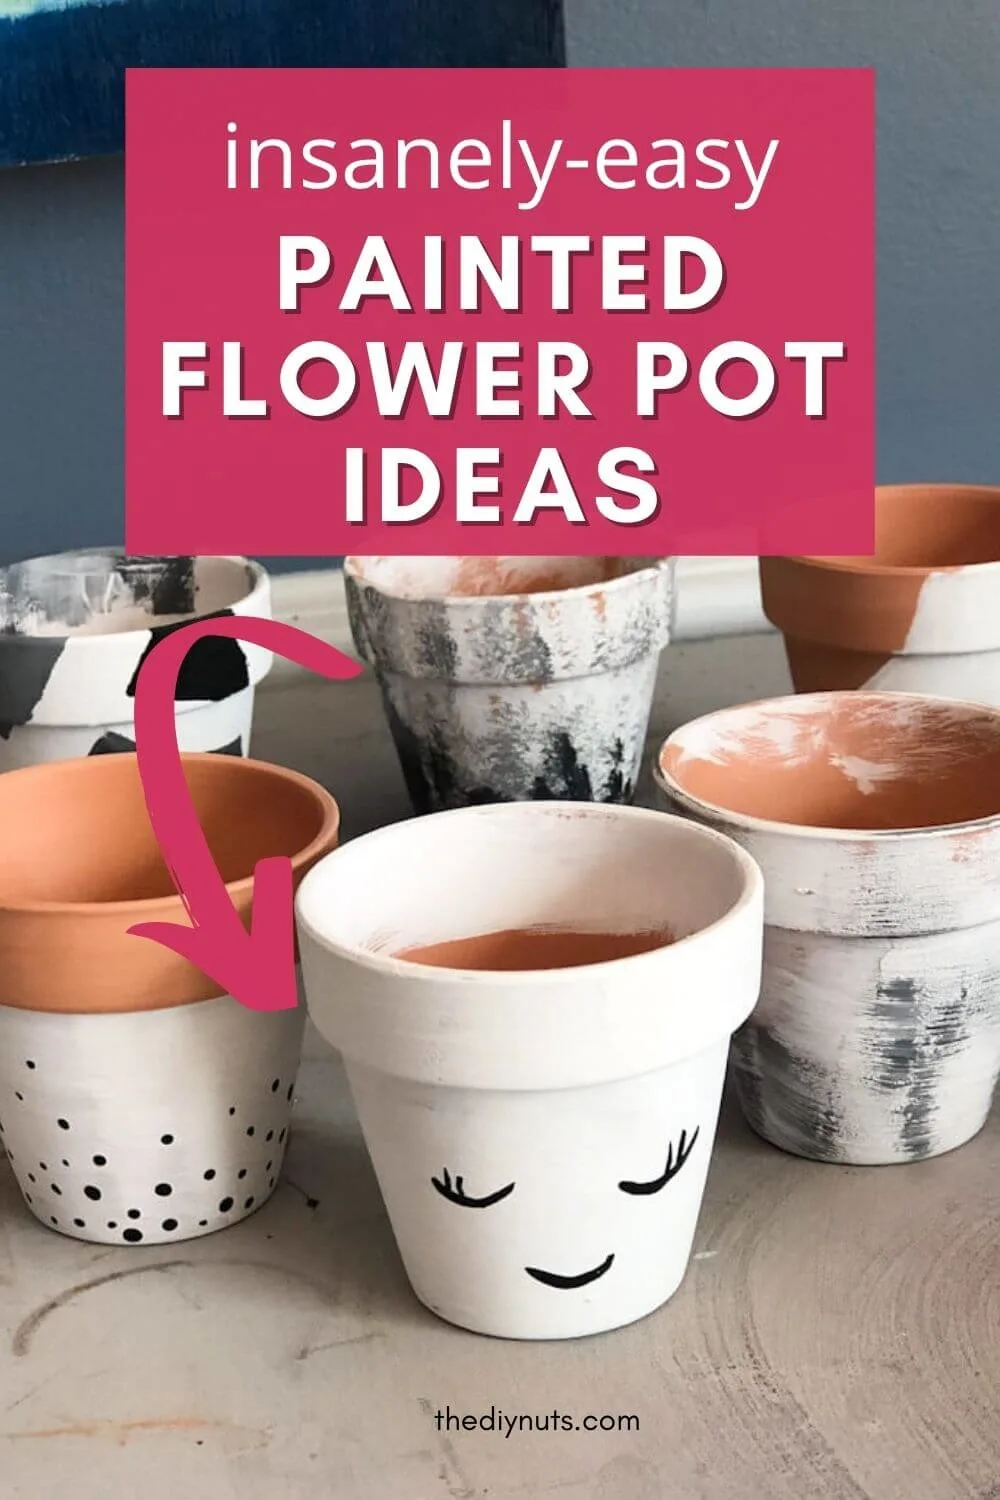 insanely-easy painted flower pot ideas